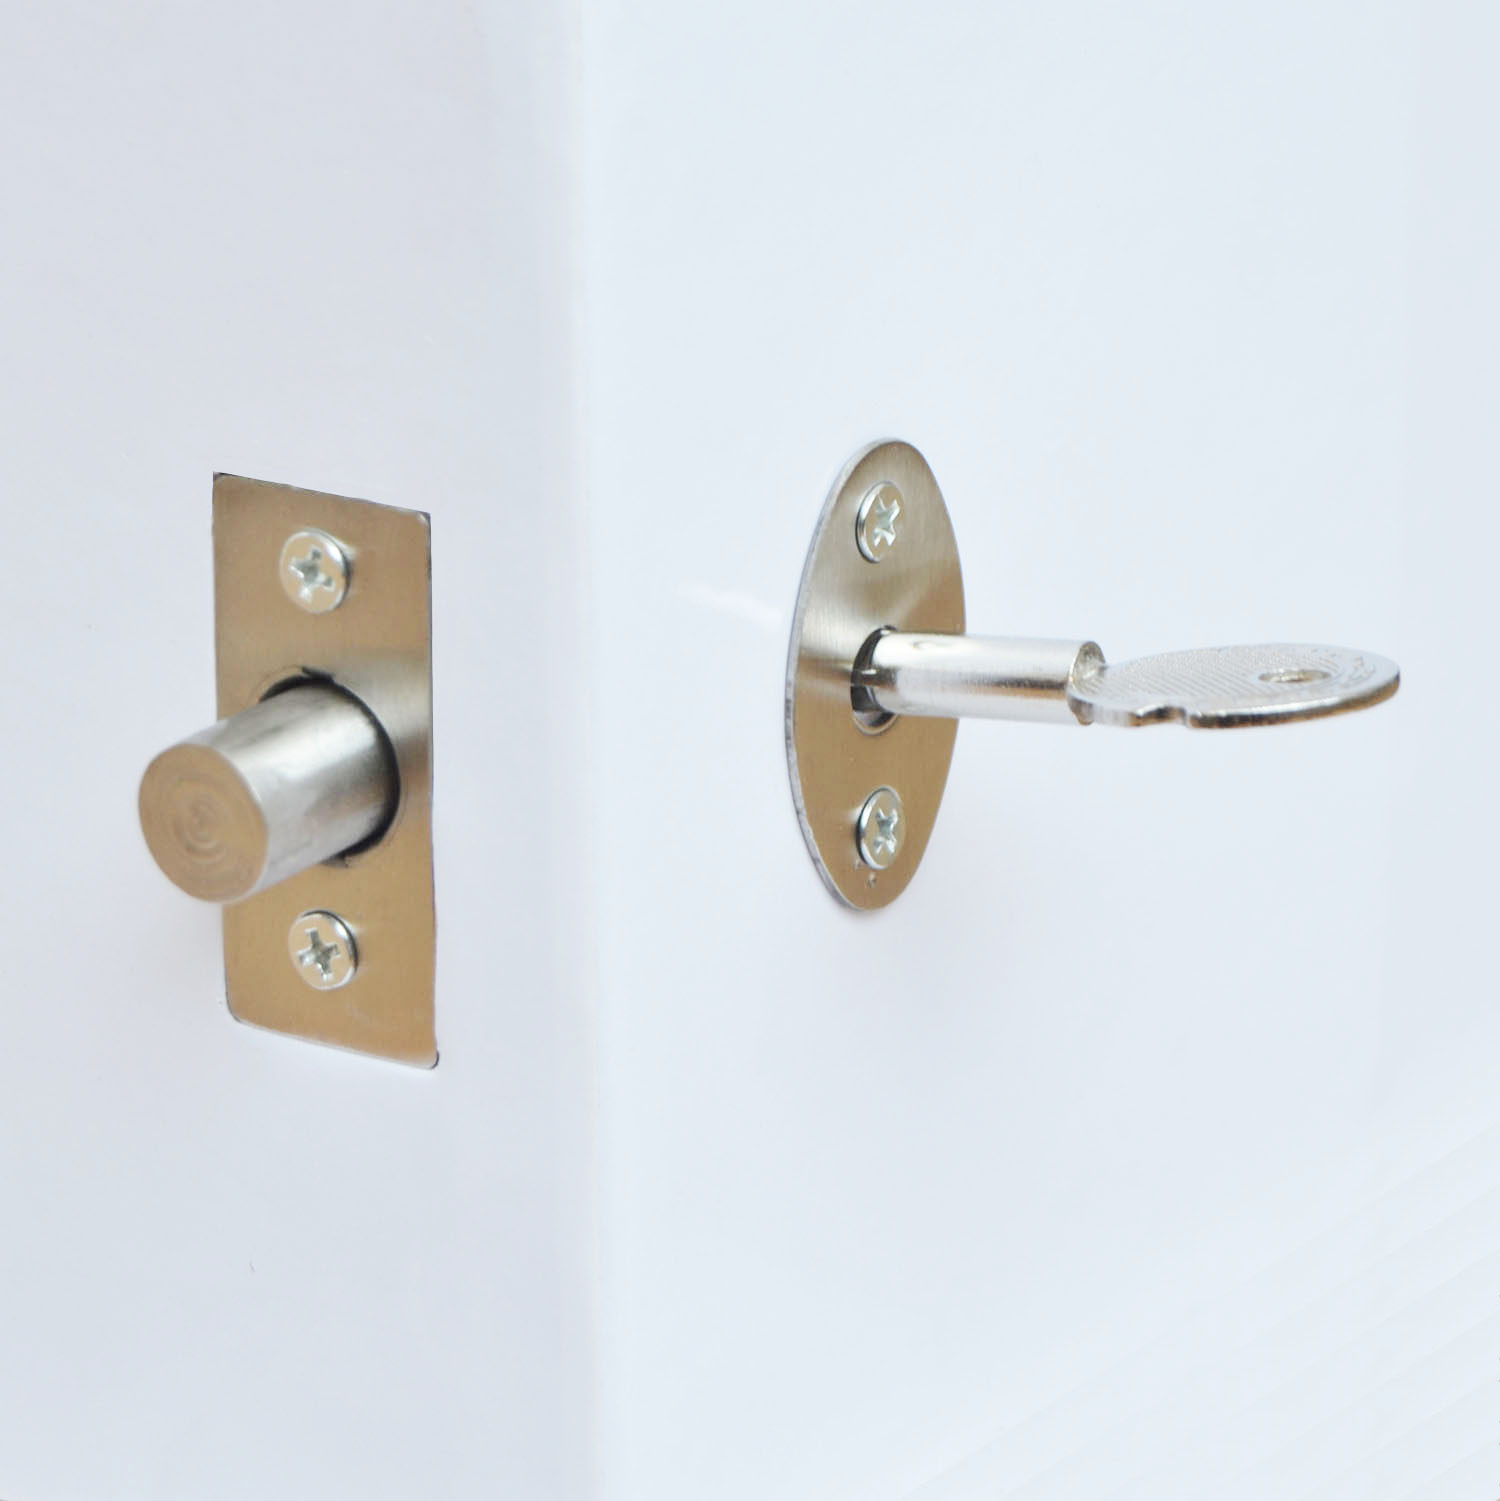 Steelpro Door & Window Lock: Secure Deadbolt w/ Key, Rust-Resistant Tube, High-Security for Home, Office & More